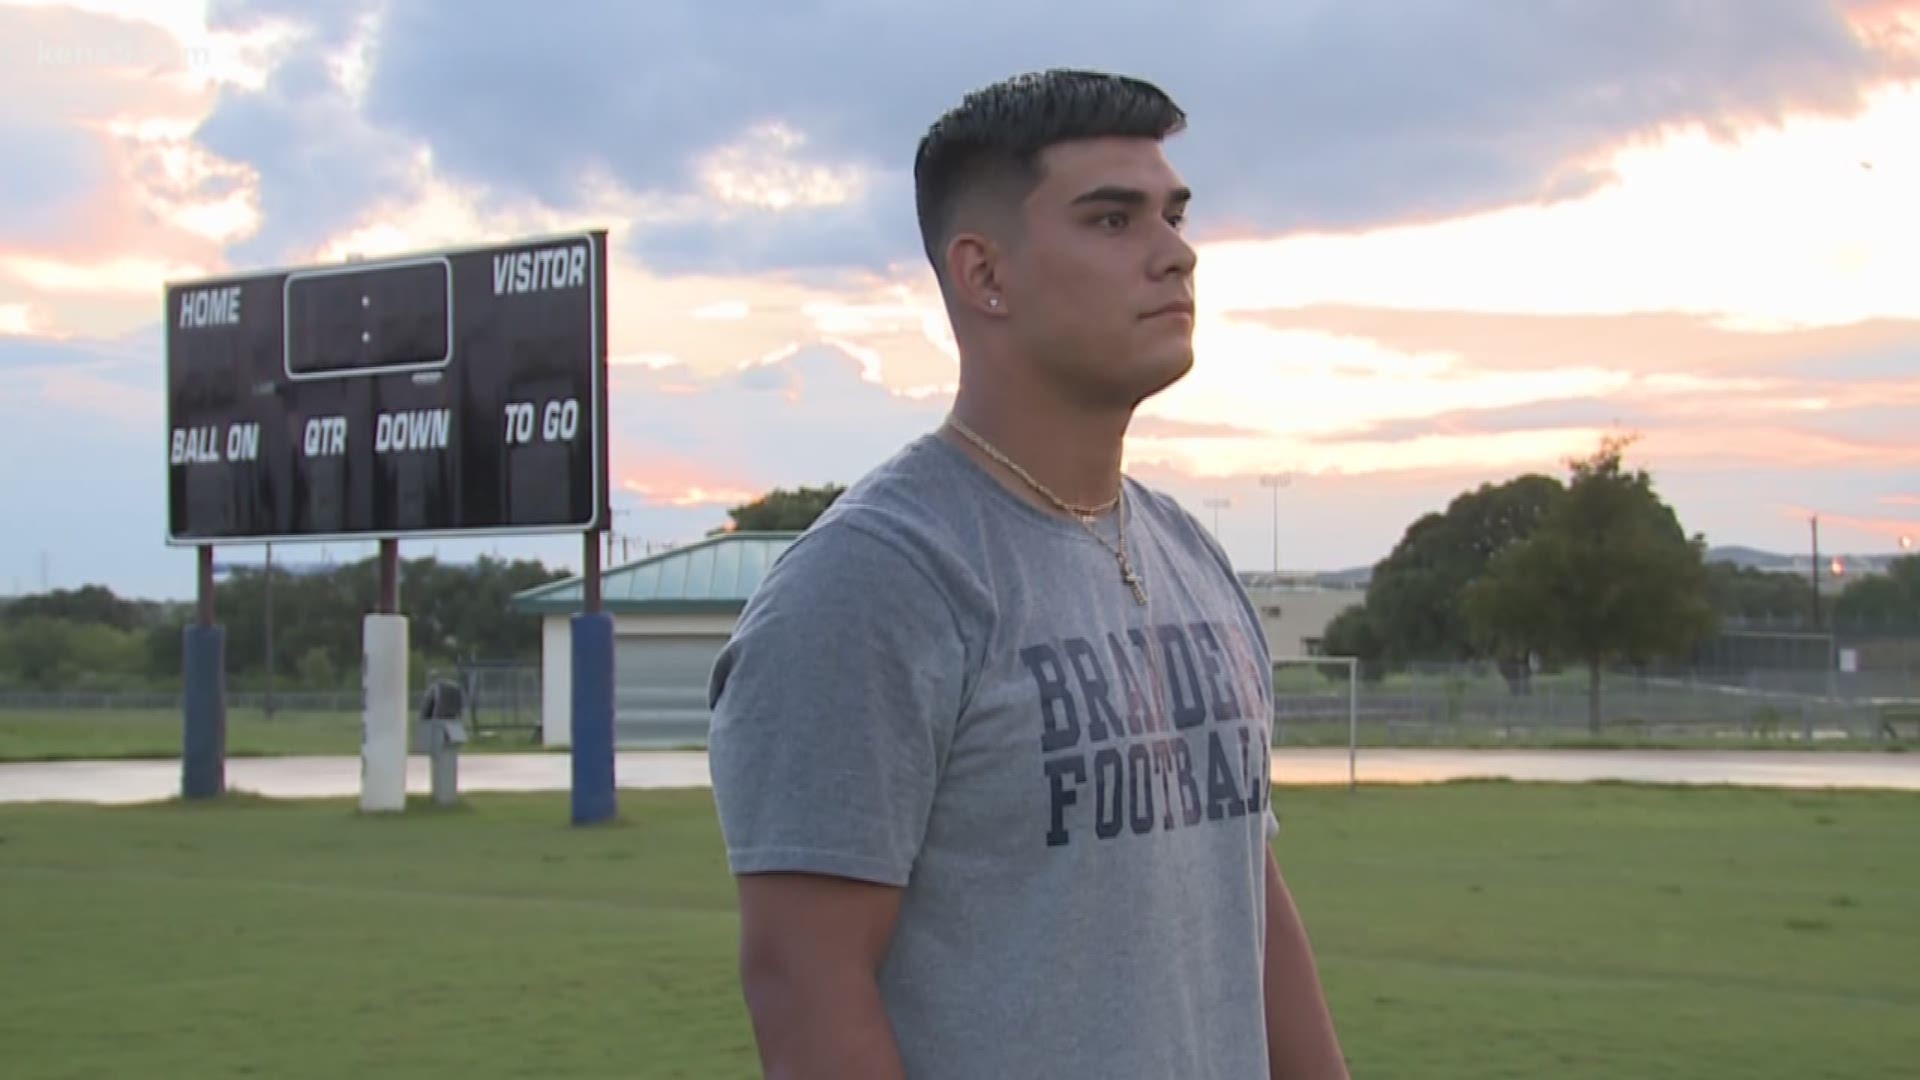 A San Antonio high school football player is inspiring people with every play he makes this year.